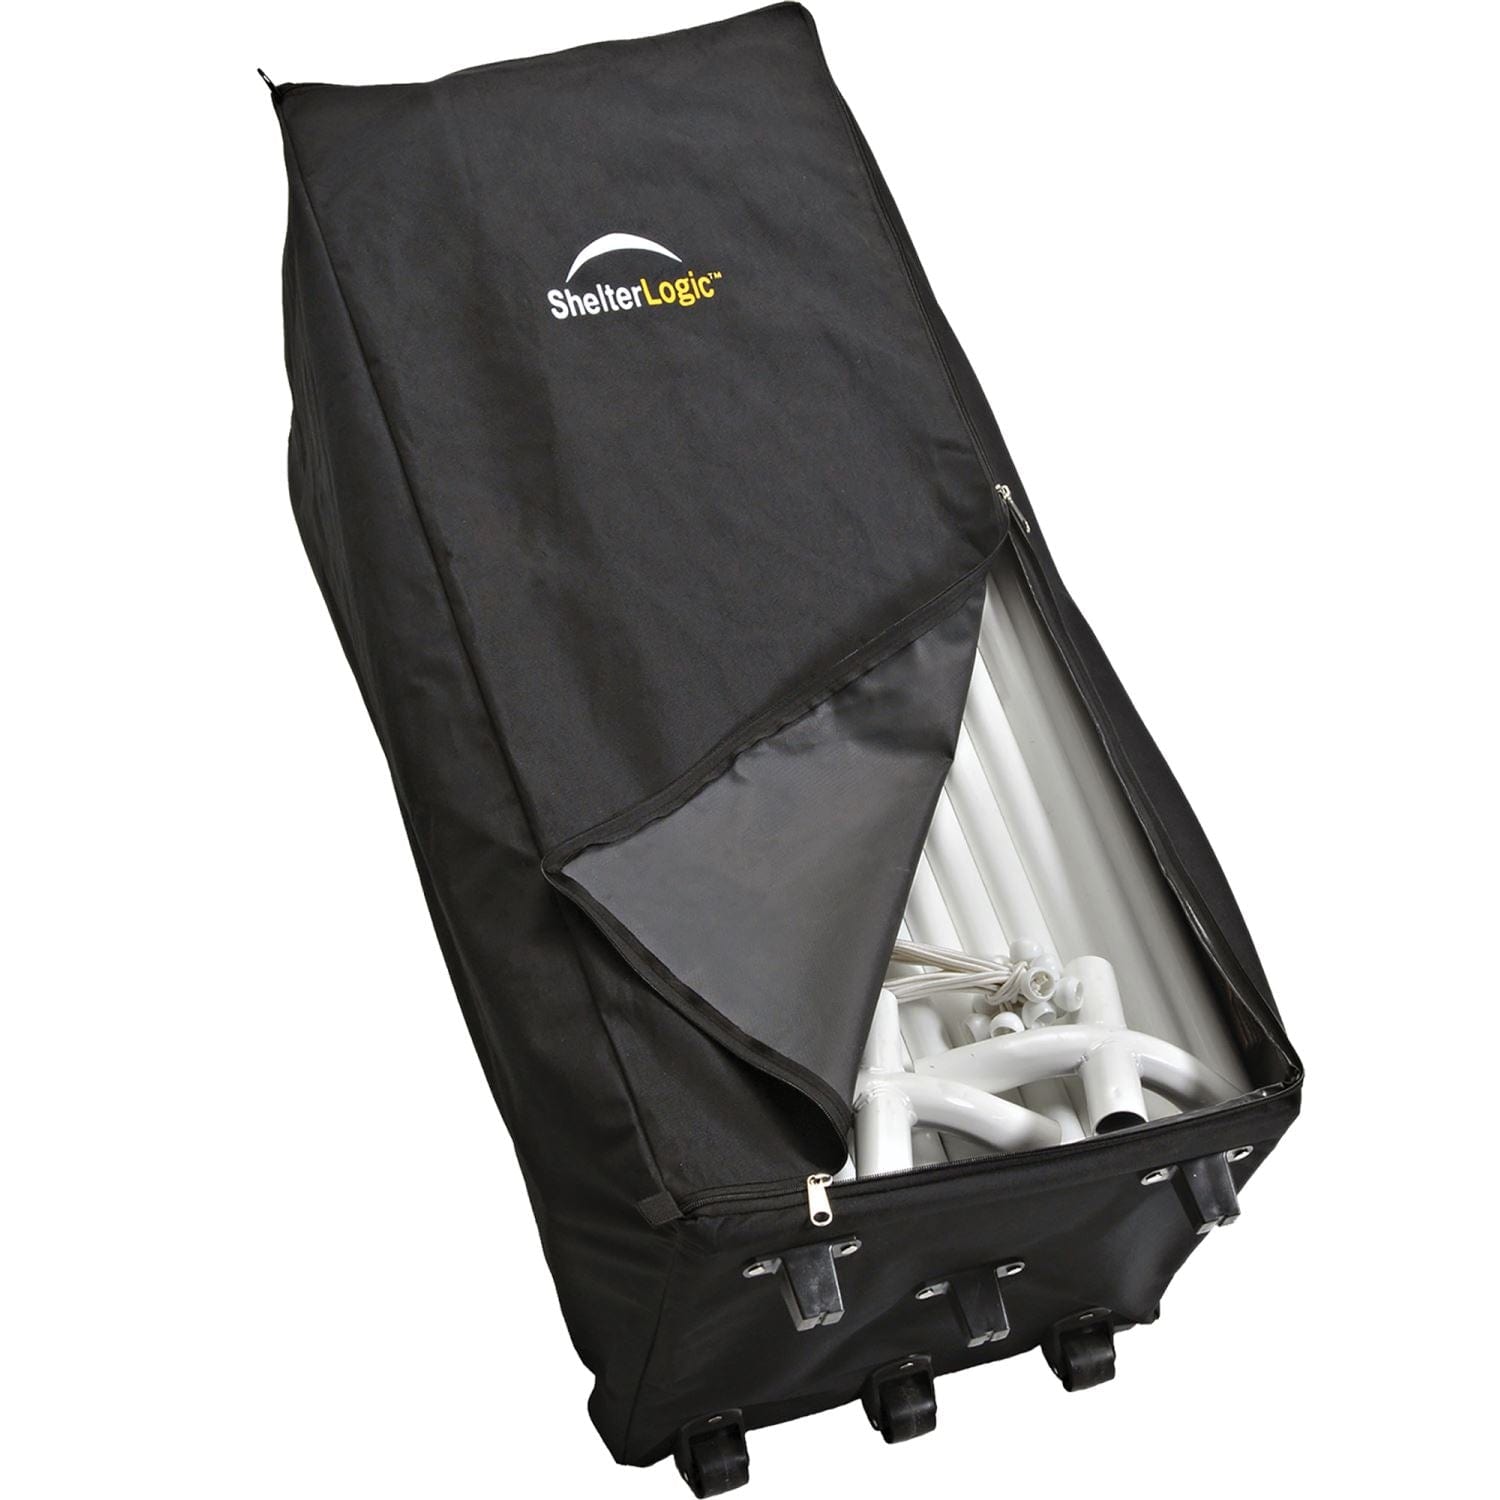 ShelterLogic Canopy Accessories ShelterLogic | STORE-IT Canopy Rolling Storage Bag for 10 x 20 ft. Canopy - Canopy sold separately. 15577